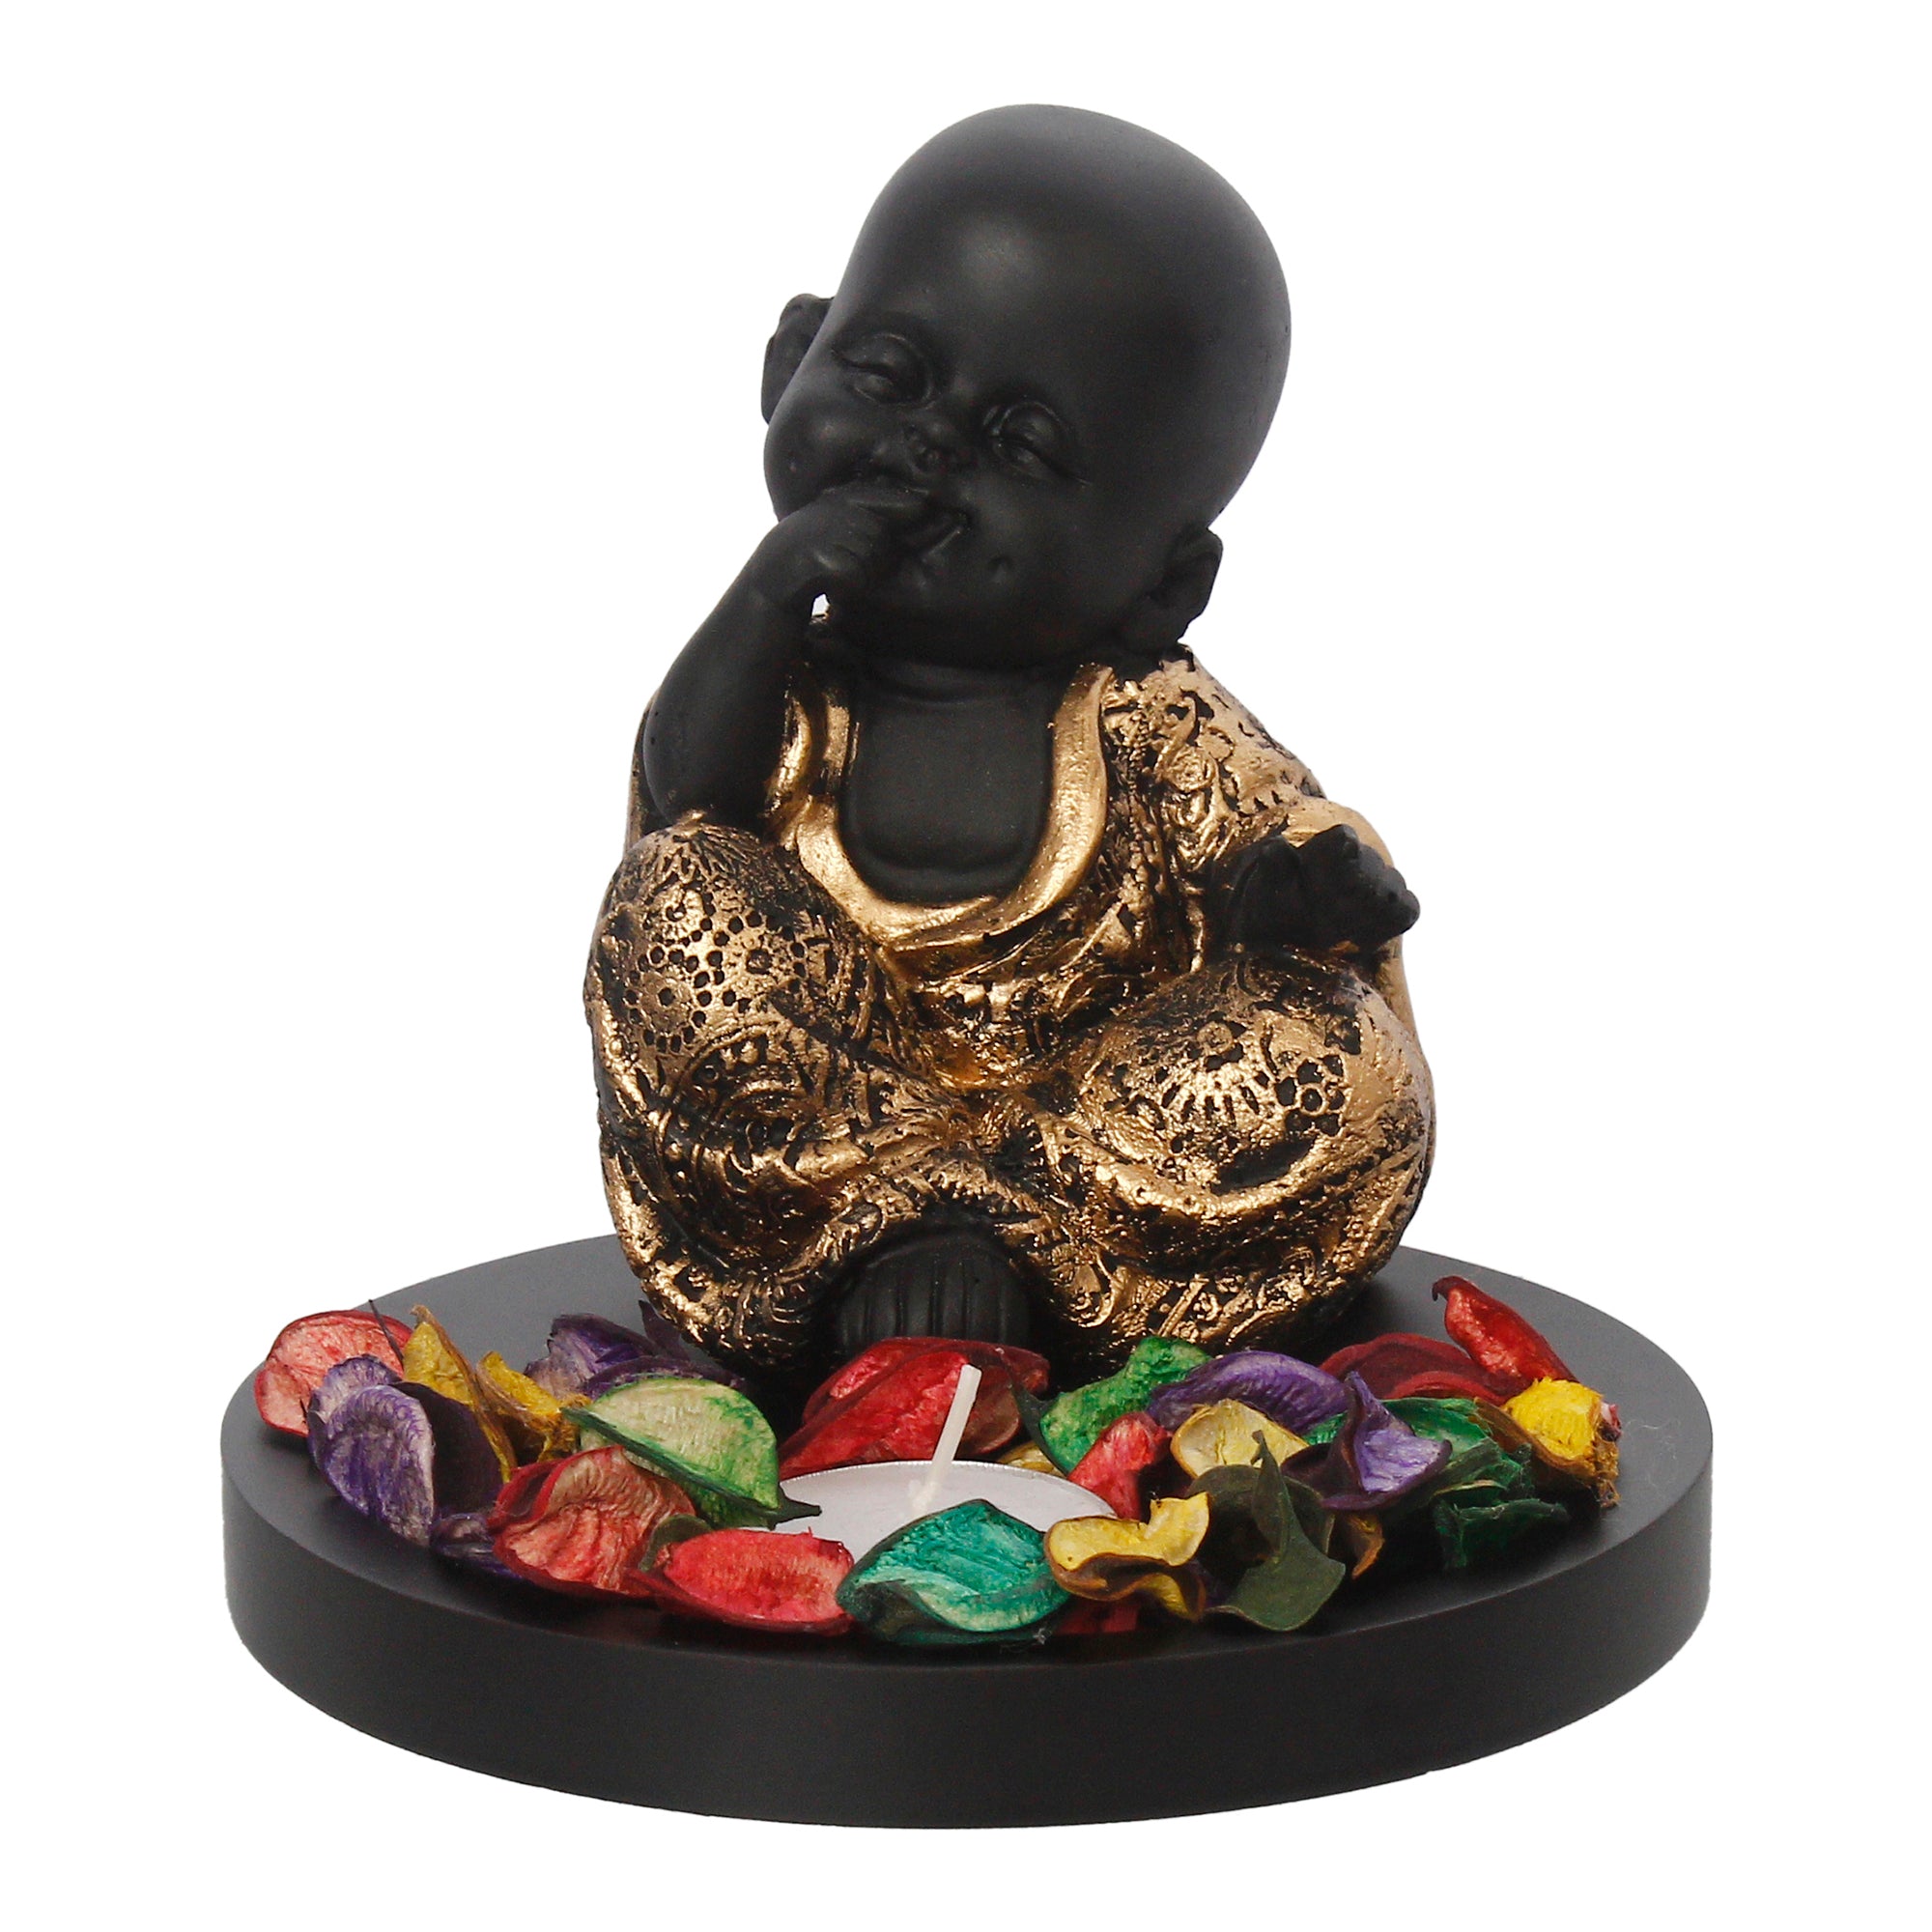 Decorative Smiling Golden Monk Buddha with Wooden Base, Fragranced Petals and Tealight 2